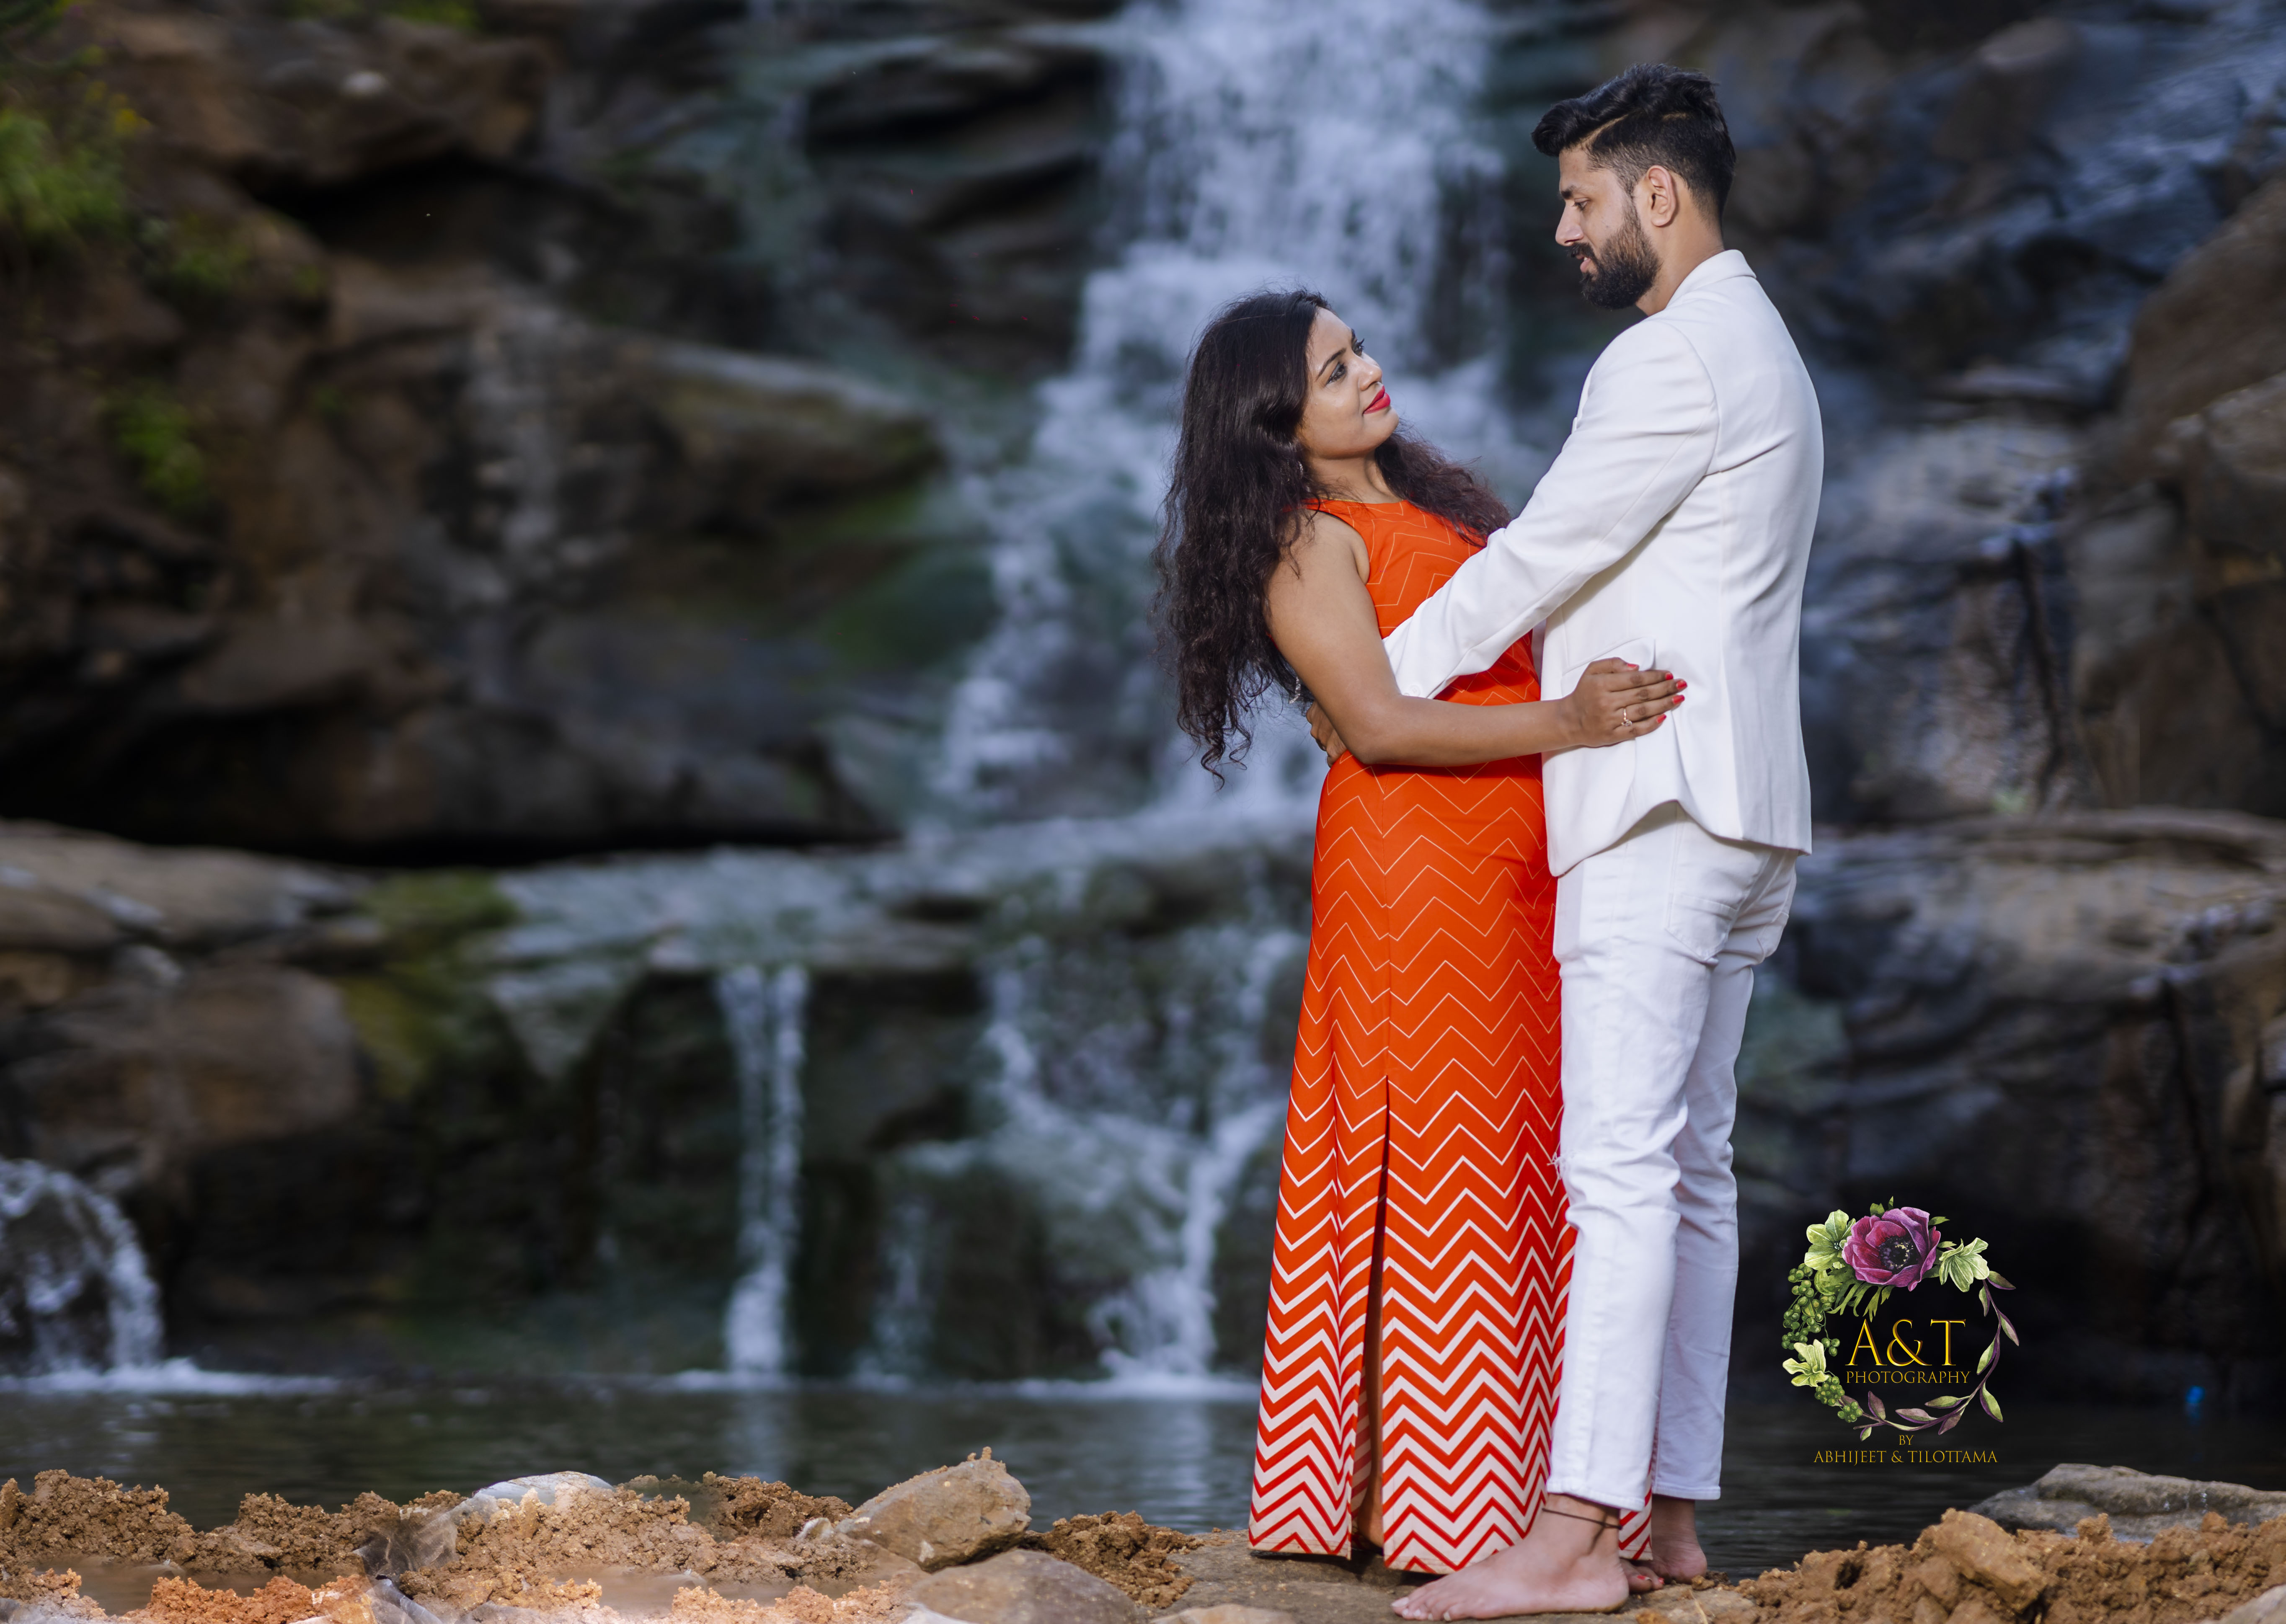 They were feeling the inner peace to see their life partners in front of their eyes during their Pre-Wedding Photoshoot in Lonawala.